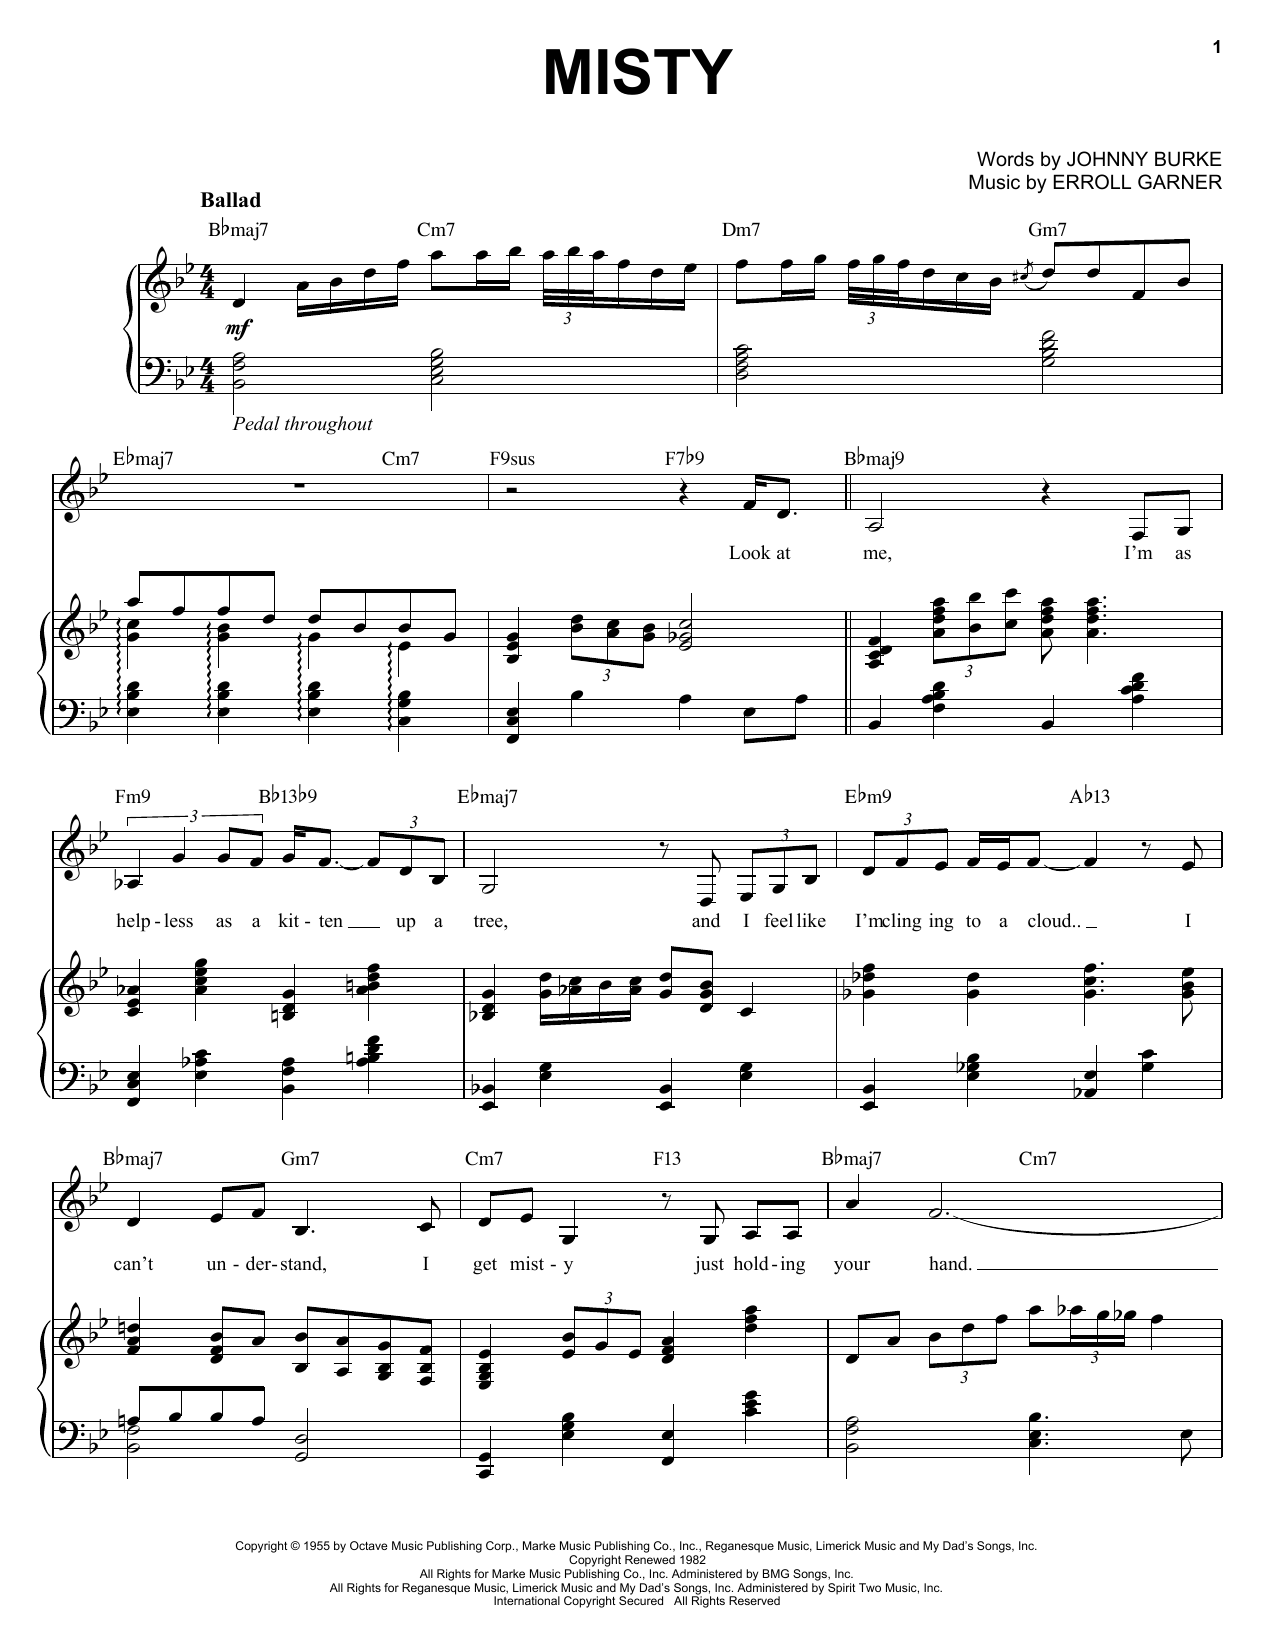 Ella Fitzgerald Misty sheet music notes and chords. Download Printable PDF.